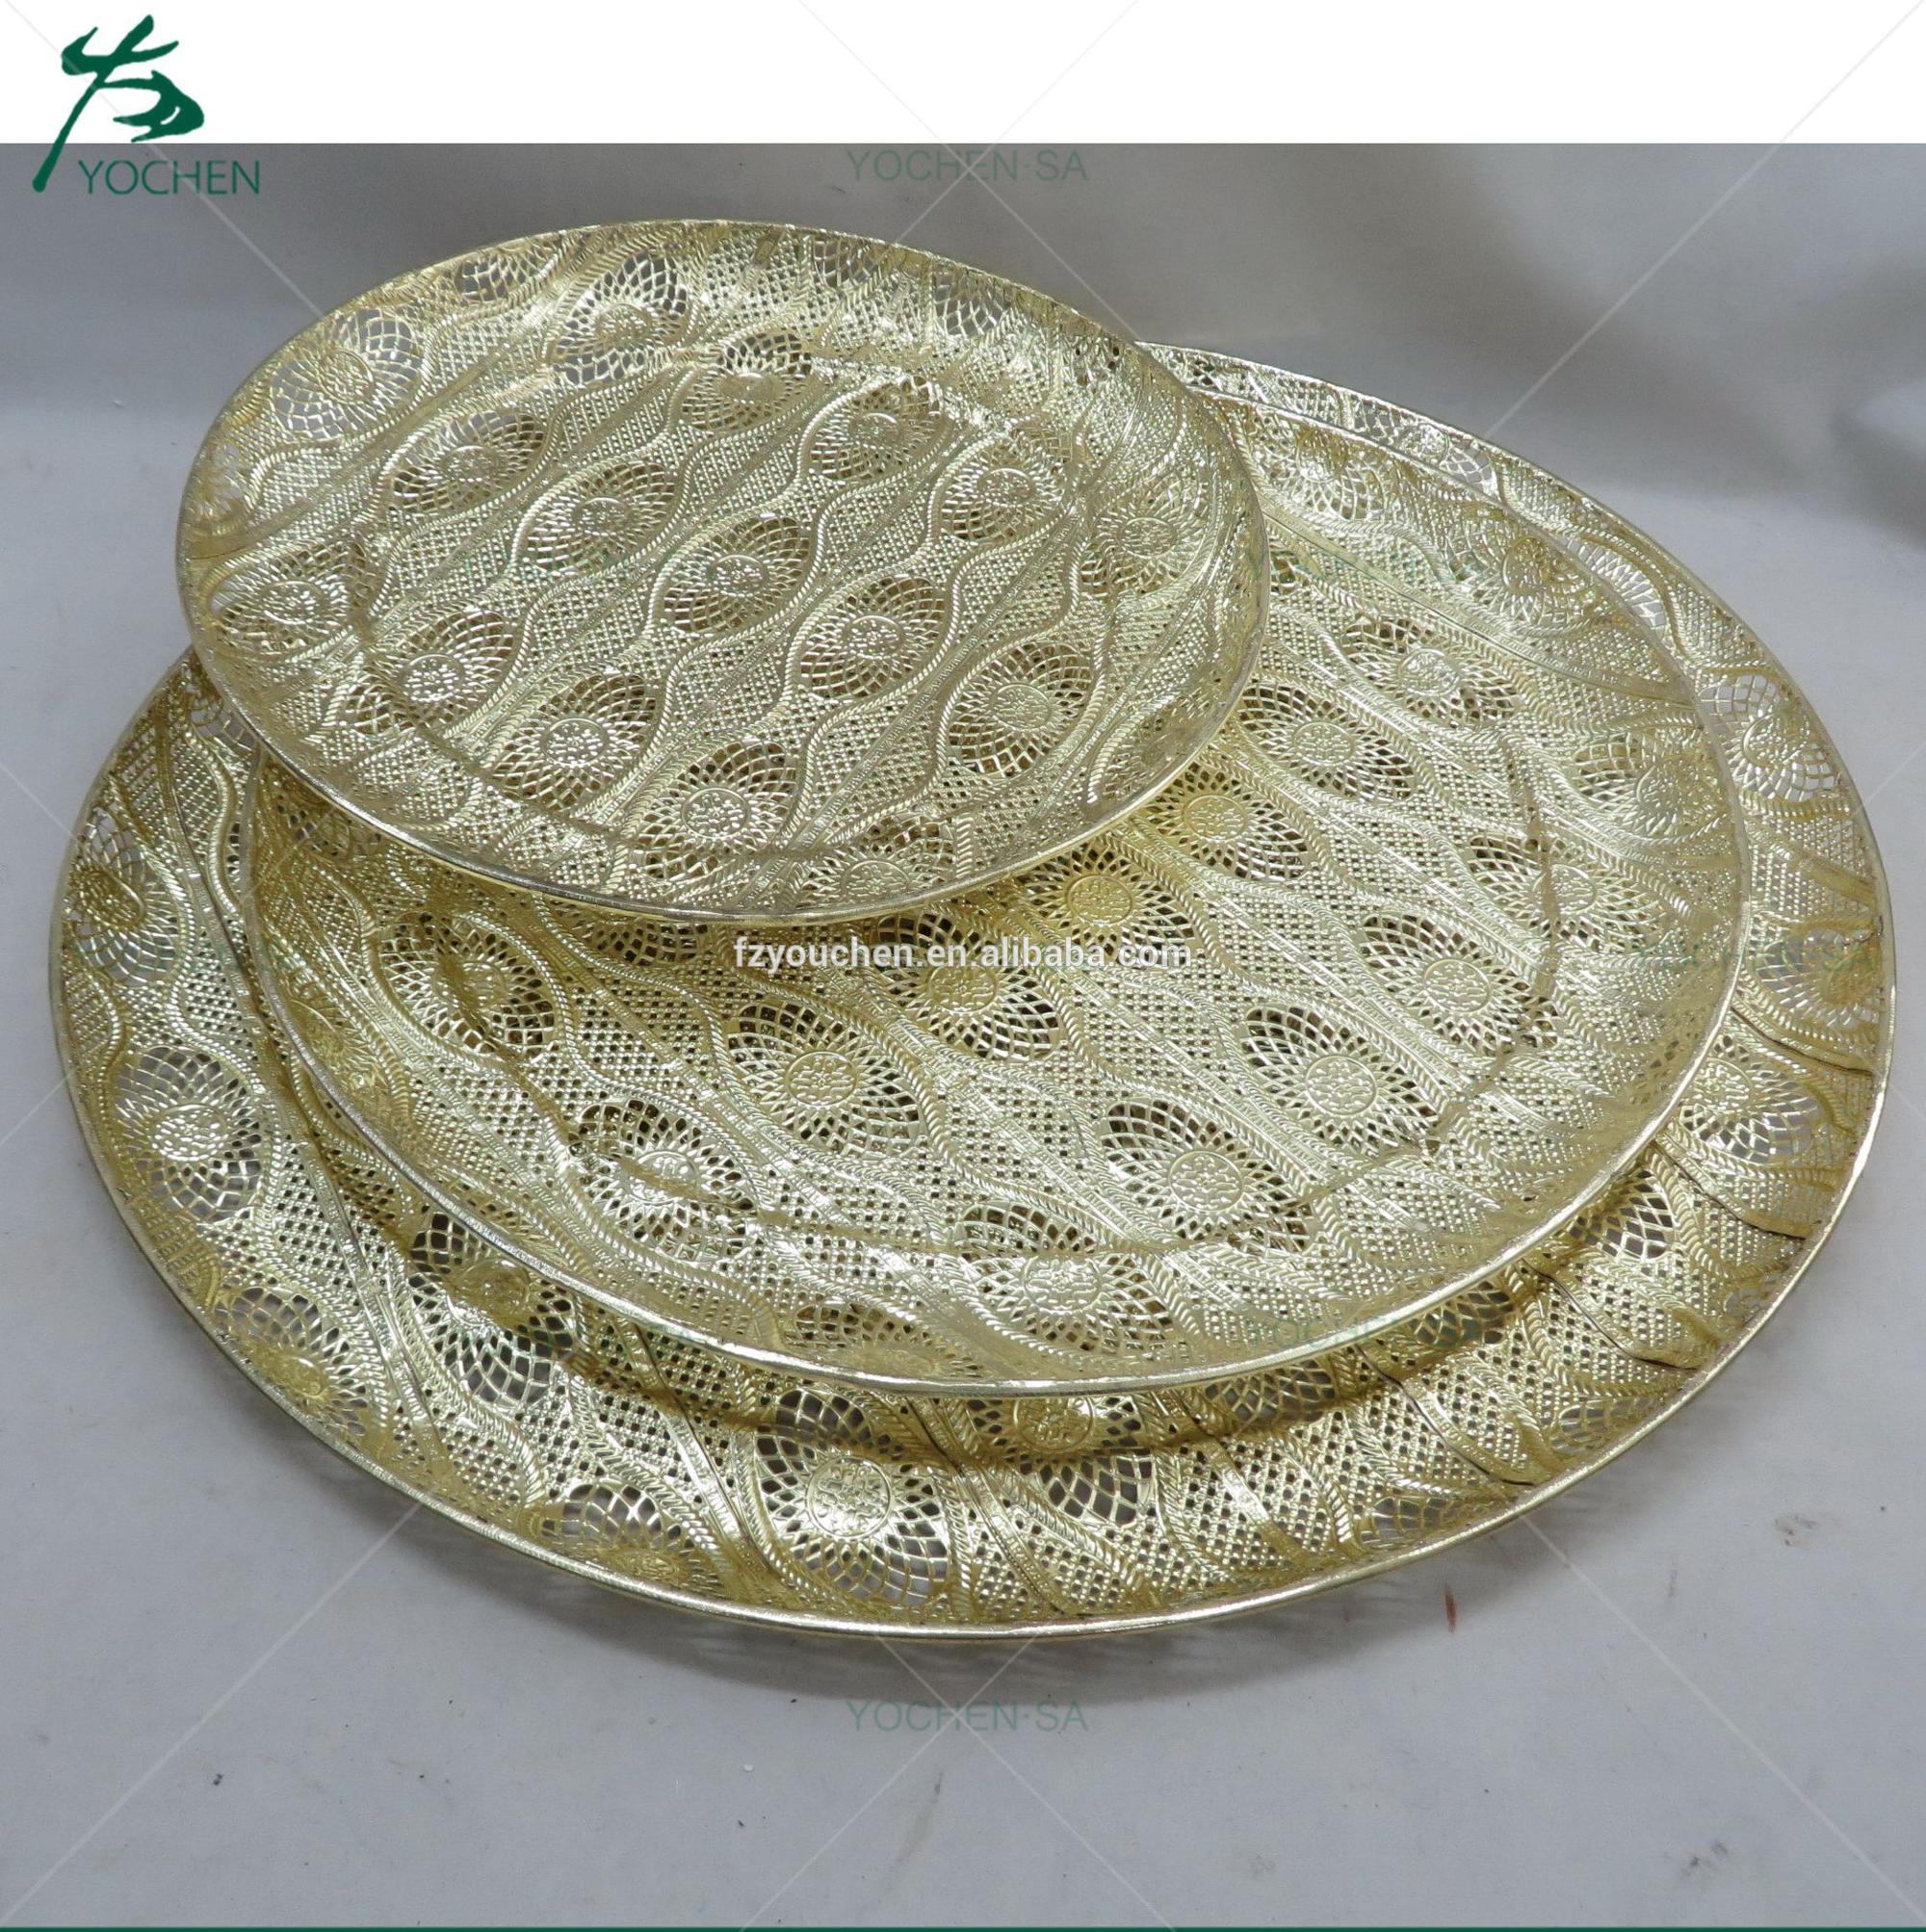 Set of Three Tray LACE EDGING SERVING PLATE Gold Vintage